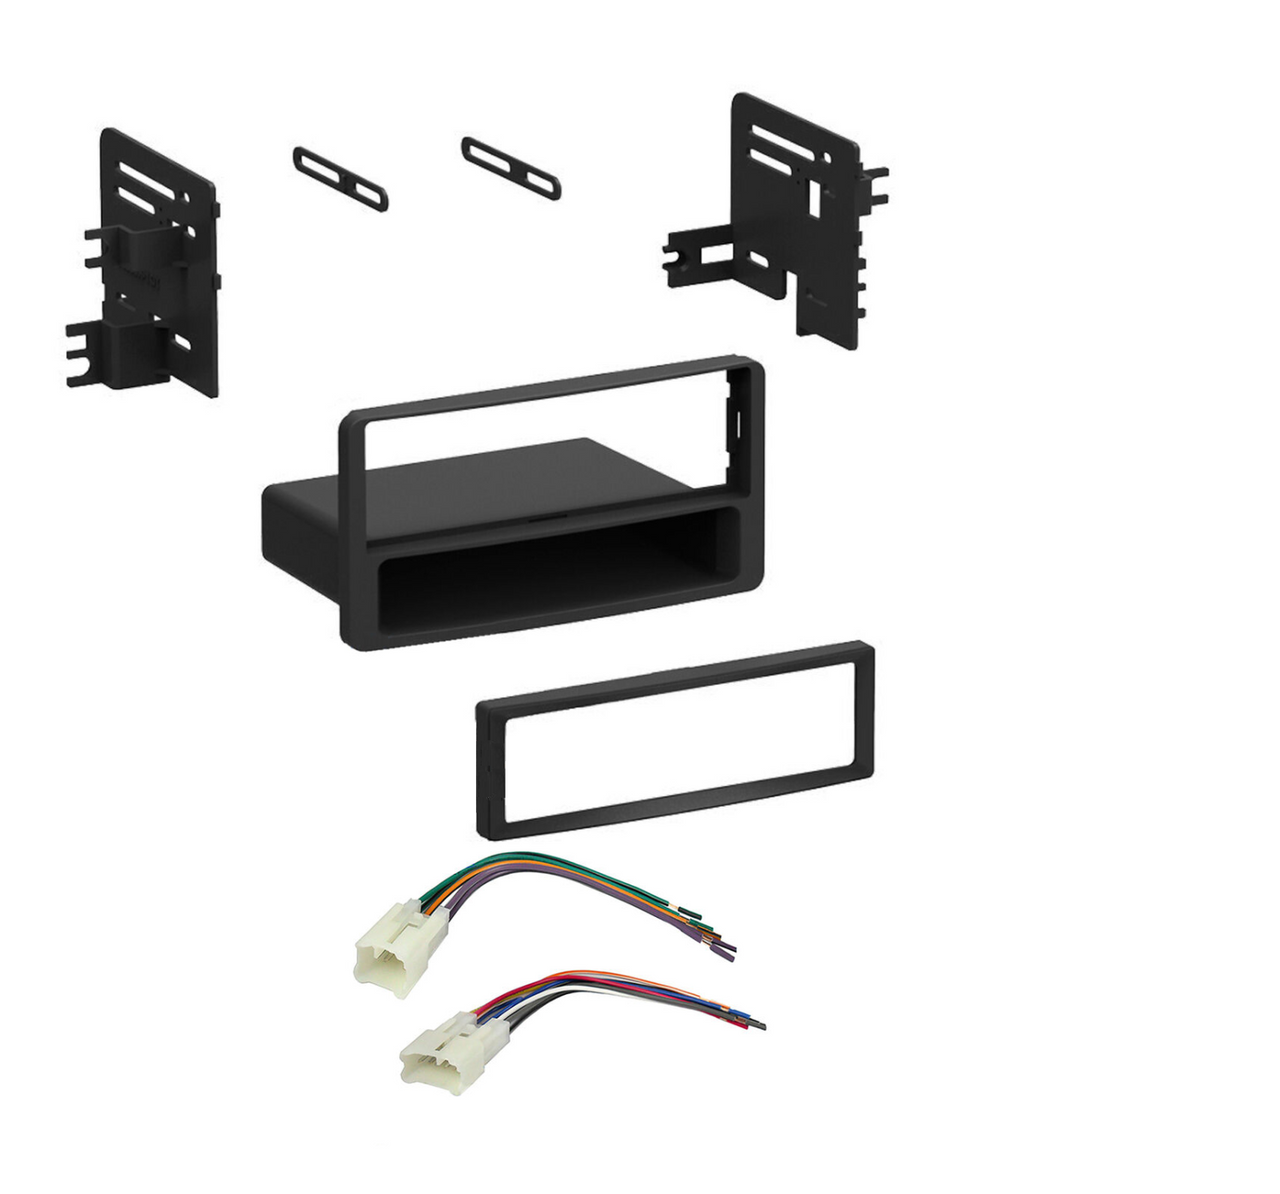 Absolute Car Radio Stereo Single Din Dash Kit & Harness for 2003-2007 Toyota Tundra Sequoia